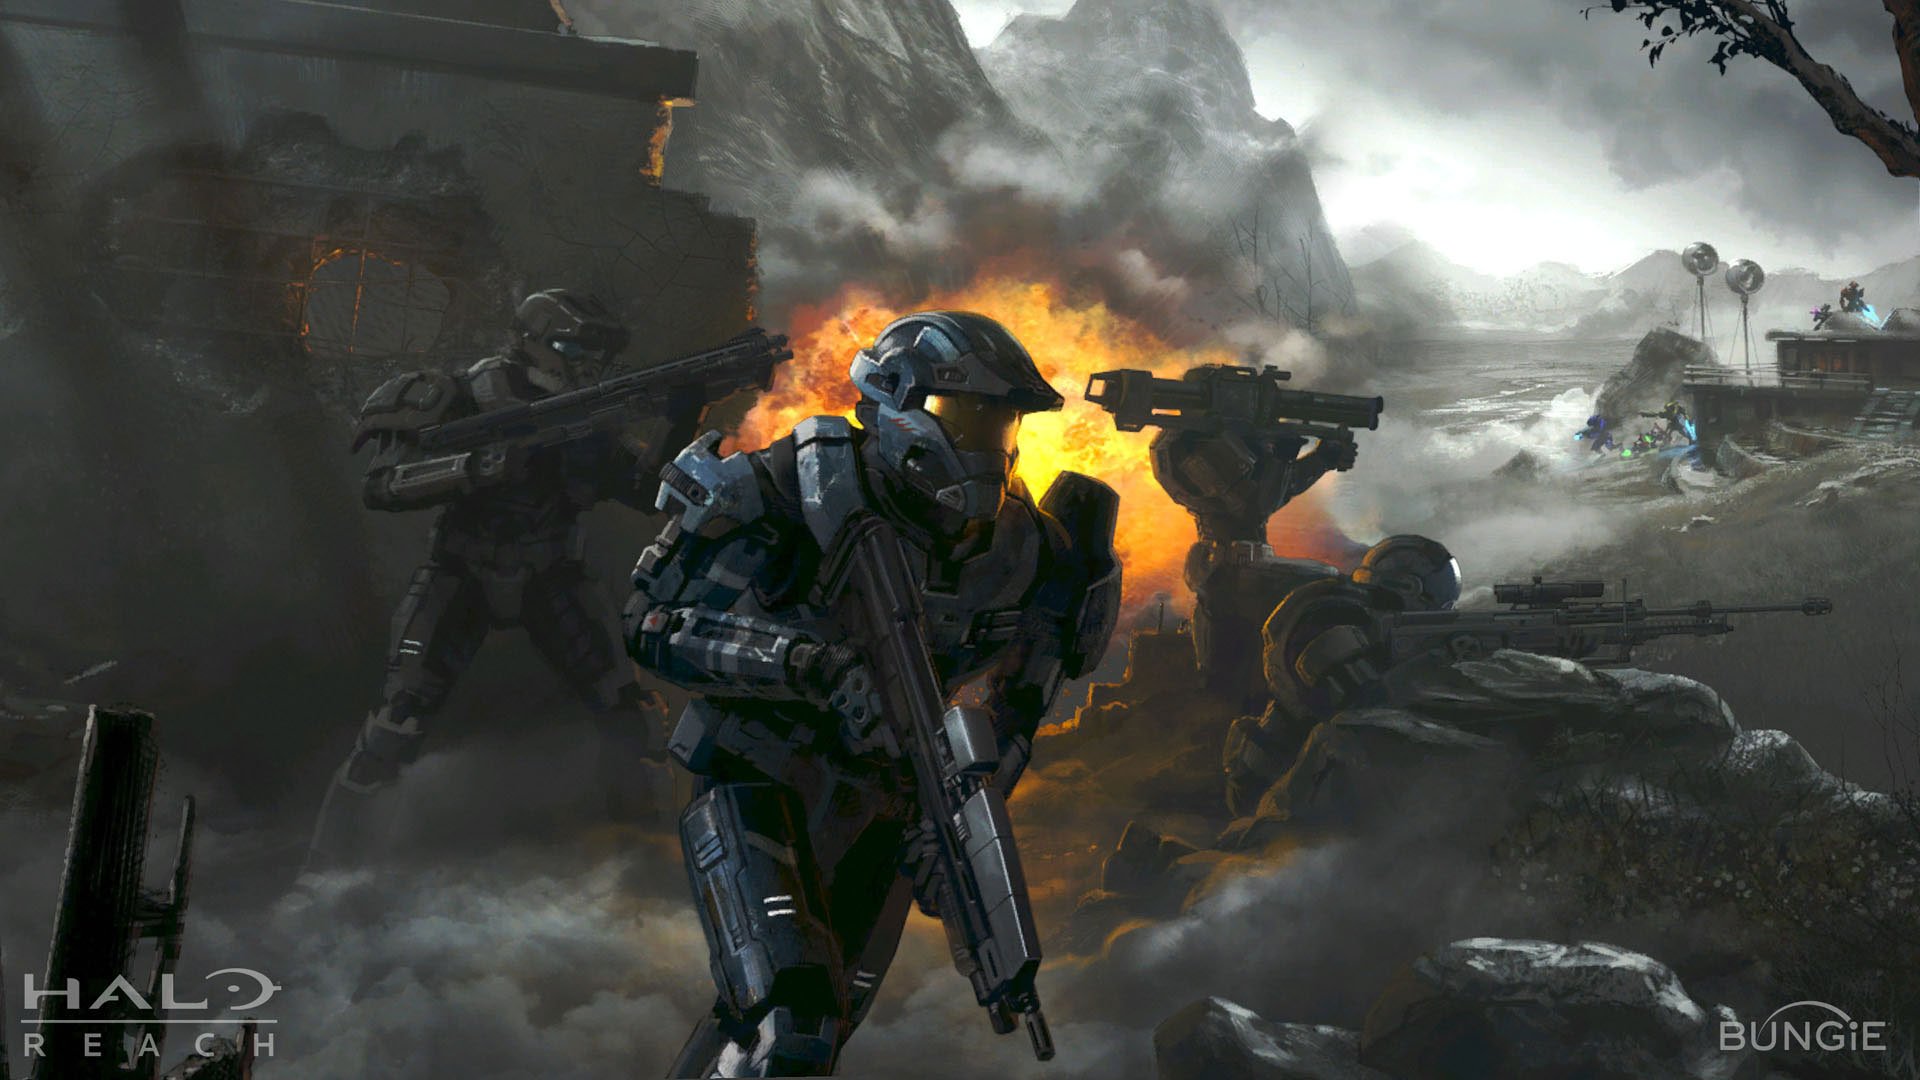 halo, Shooter, Fps, Action, Fighting, Warrior, Sci fi, Futuristic, Armor, Cyborg, Robot Wallpaper